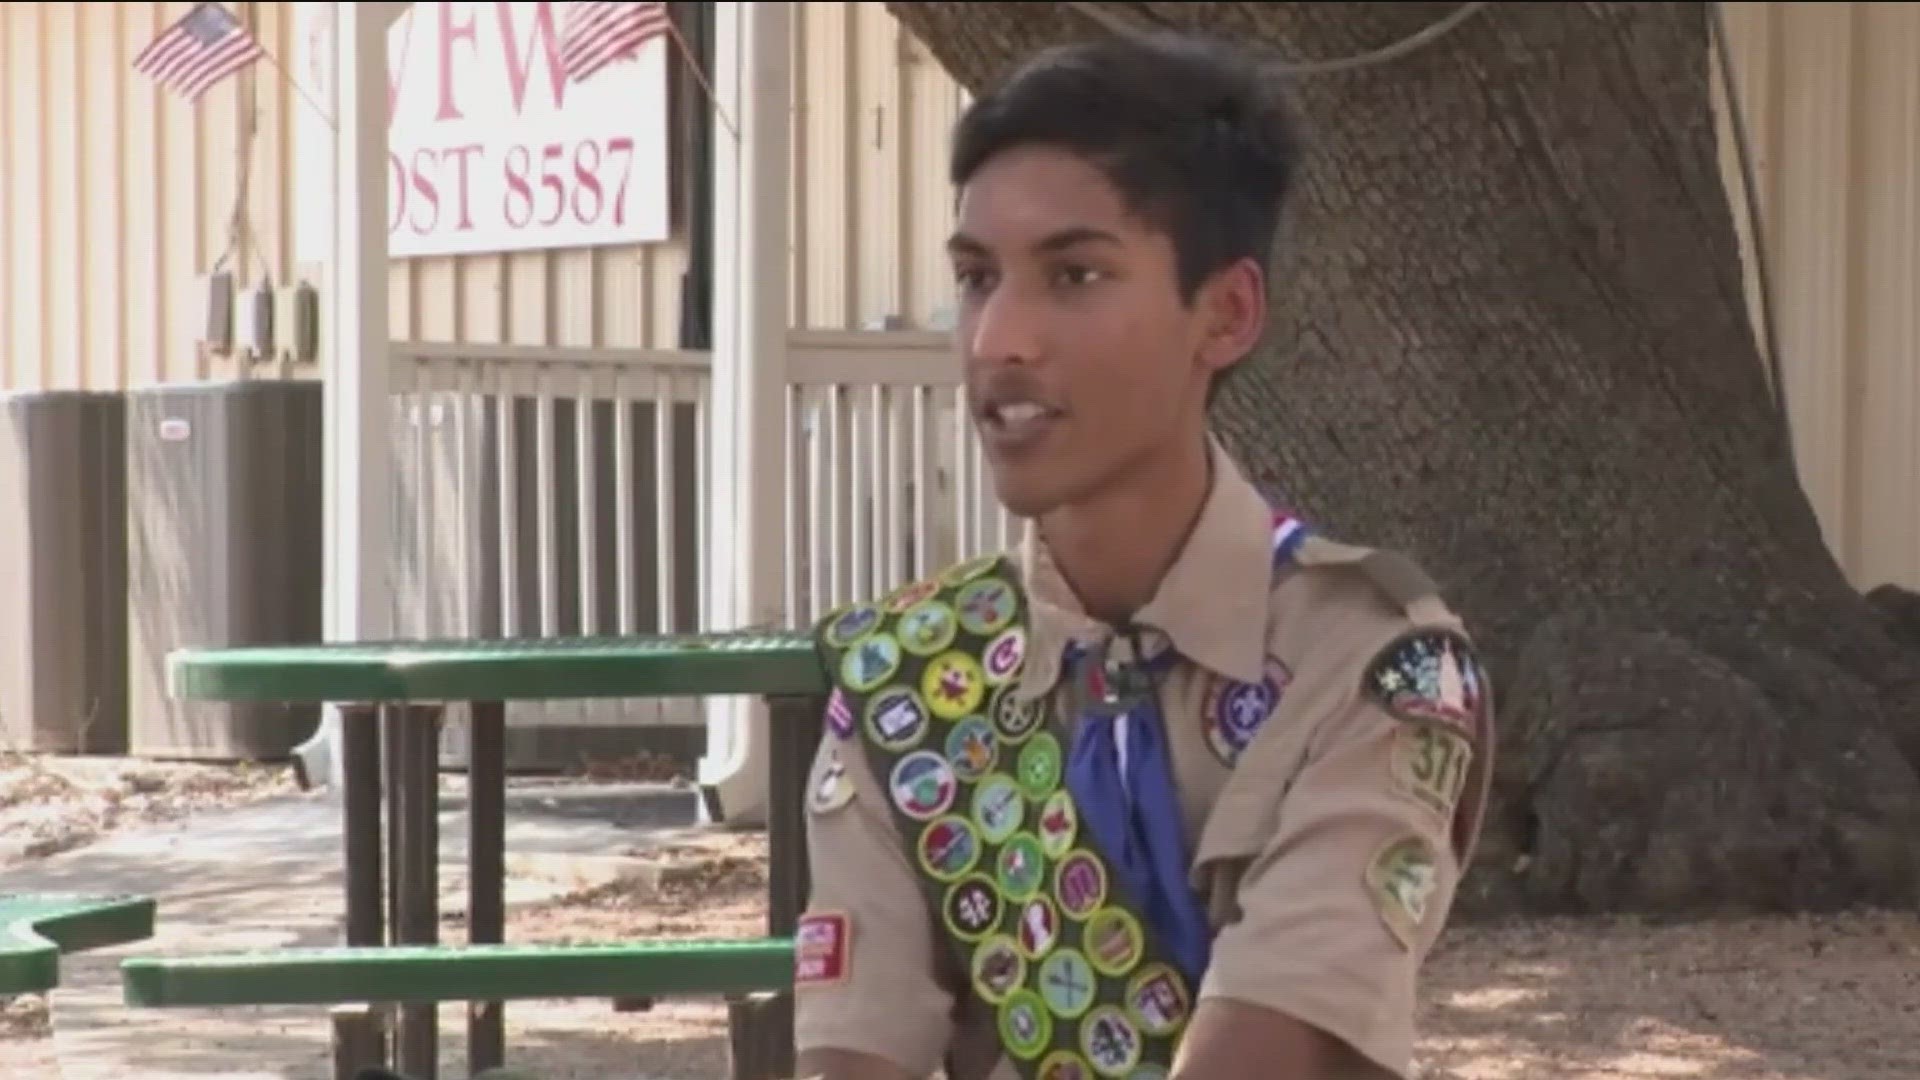 An Austin teenager is celebrating a rare accomplishment. At 17 years old, he earned every merit badge his Boy Scouts program has to offer.